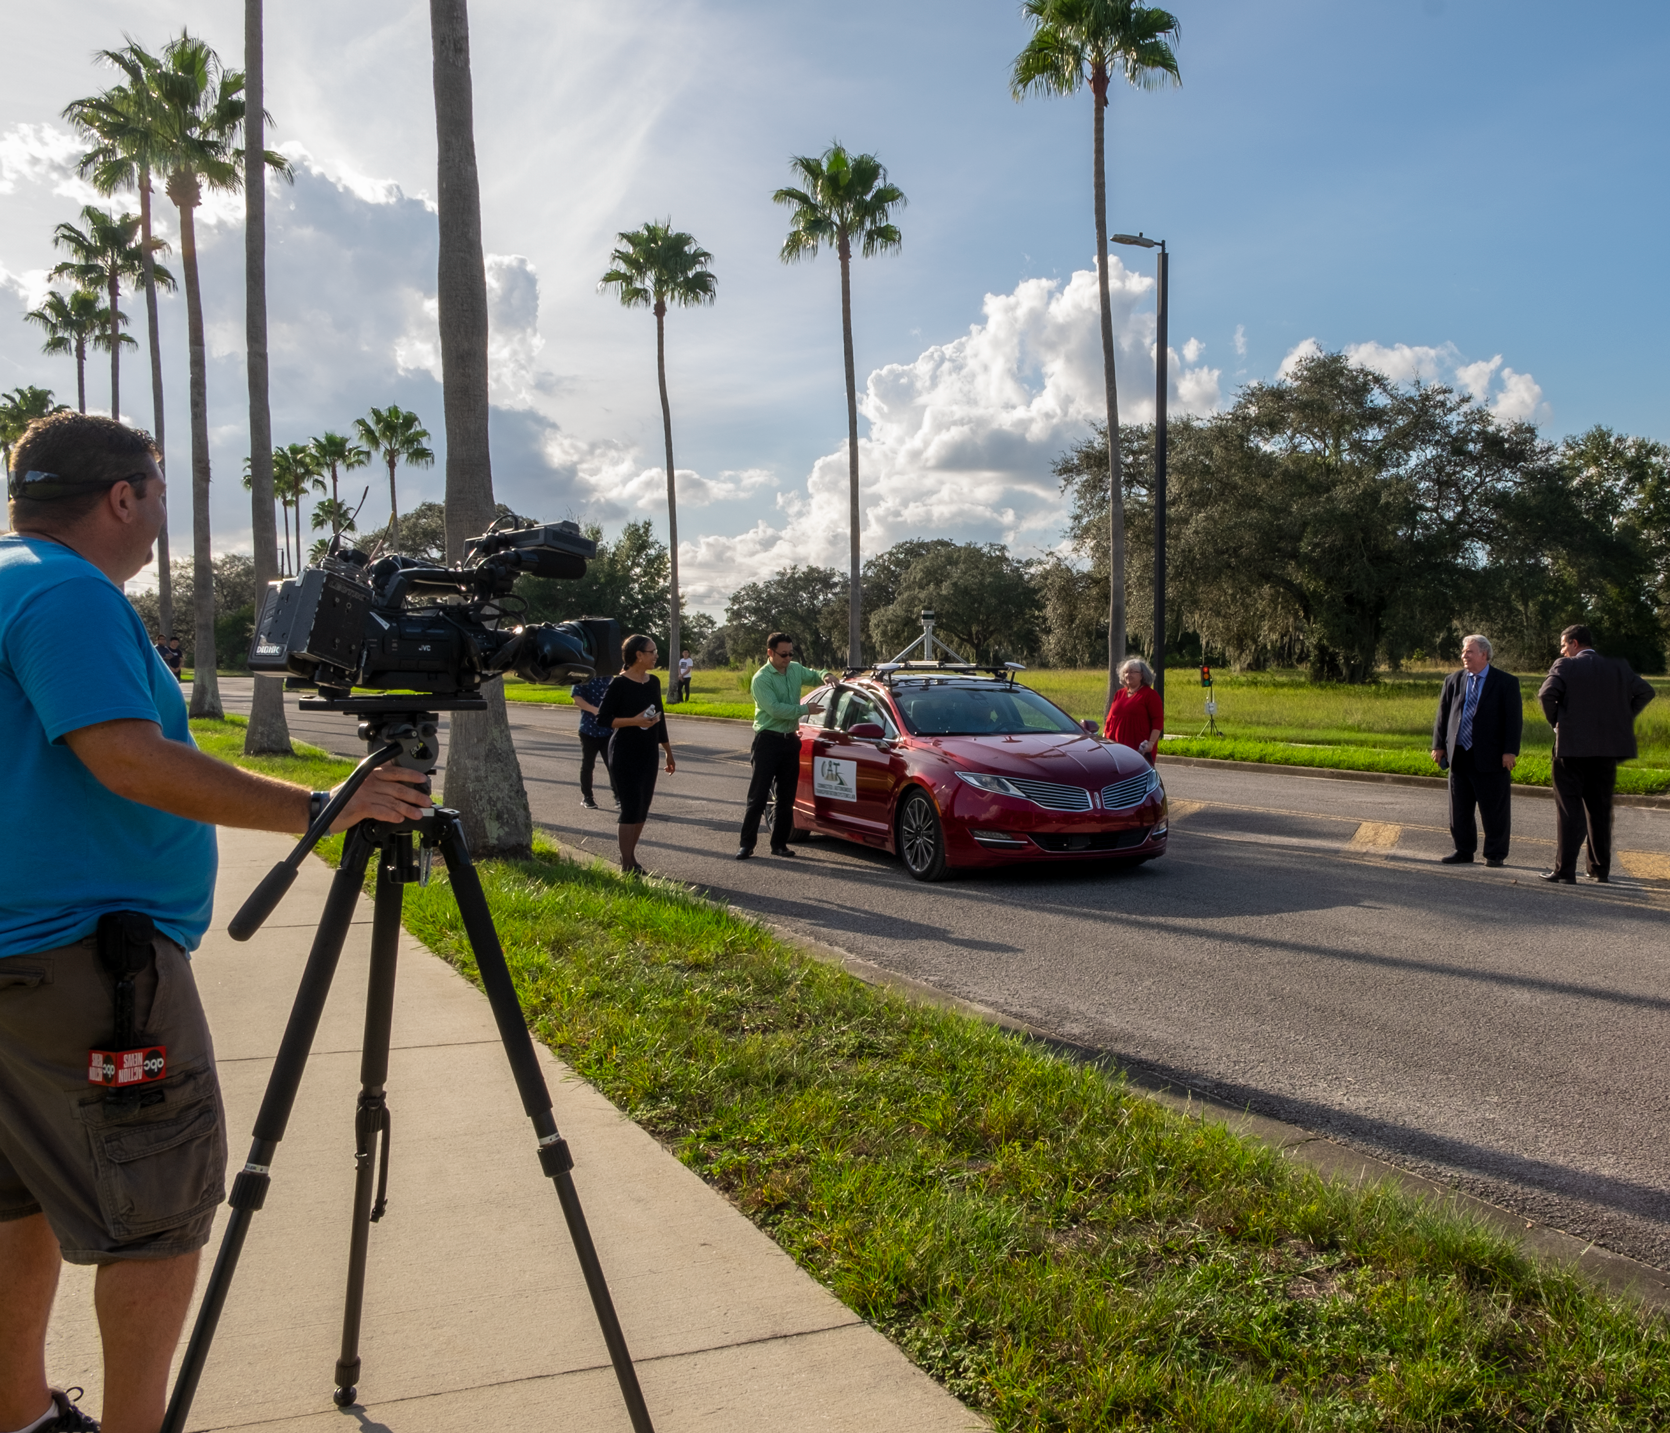 USF Civil and Environmental Engineering professor Xiaopeng (Shaw) Li (fourth from right), Ph.D., details features of his lab’s autonomous and connected vehicle to U.S. Department of Transportation representatives and guests during a technology demonstration at USF.